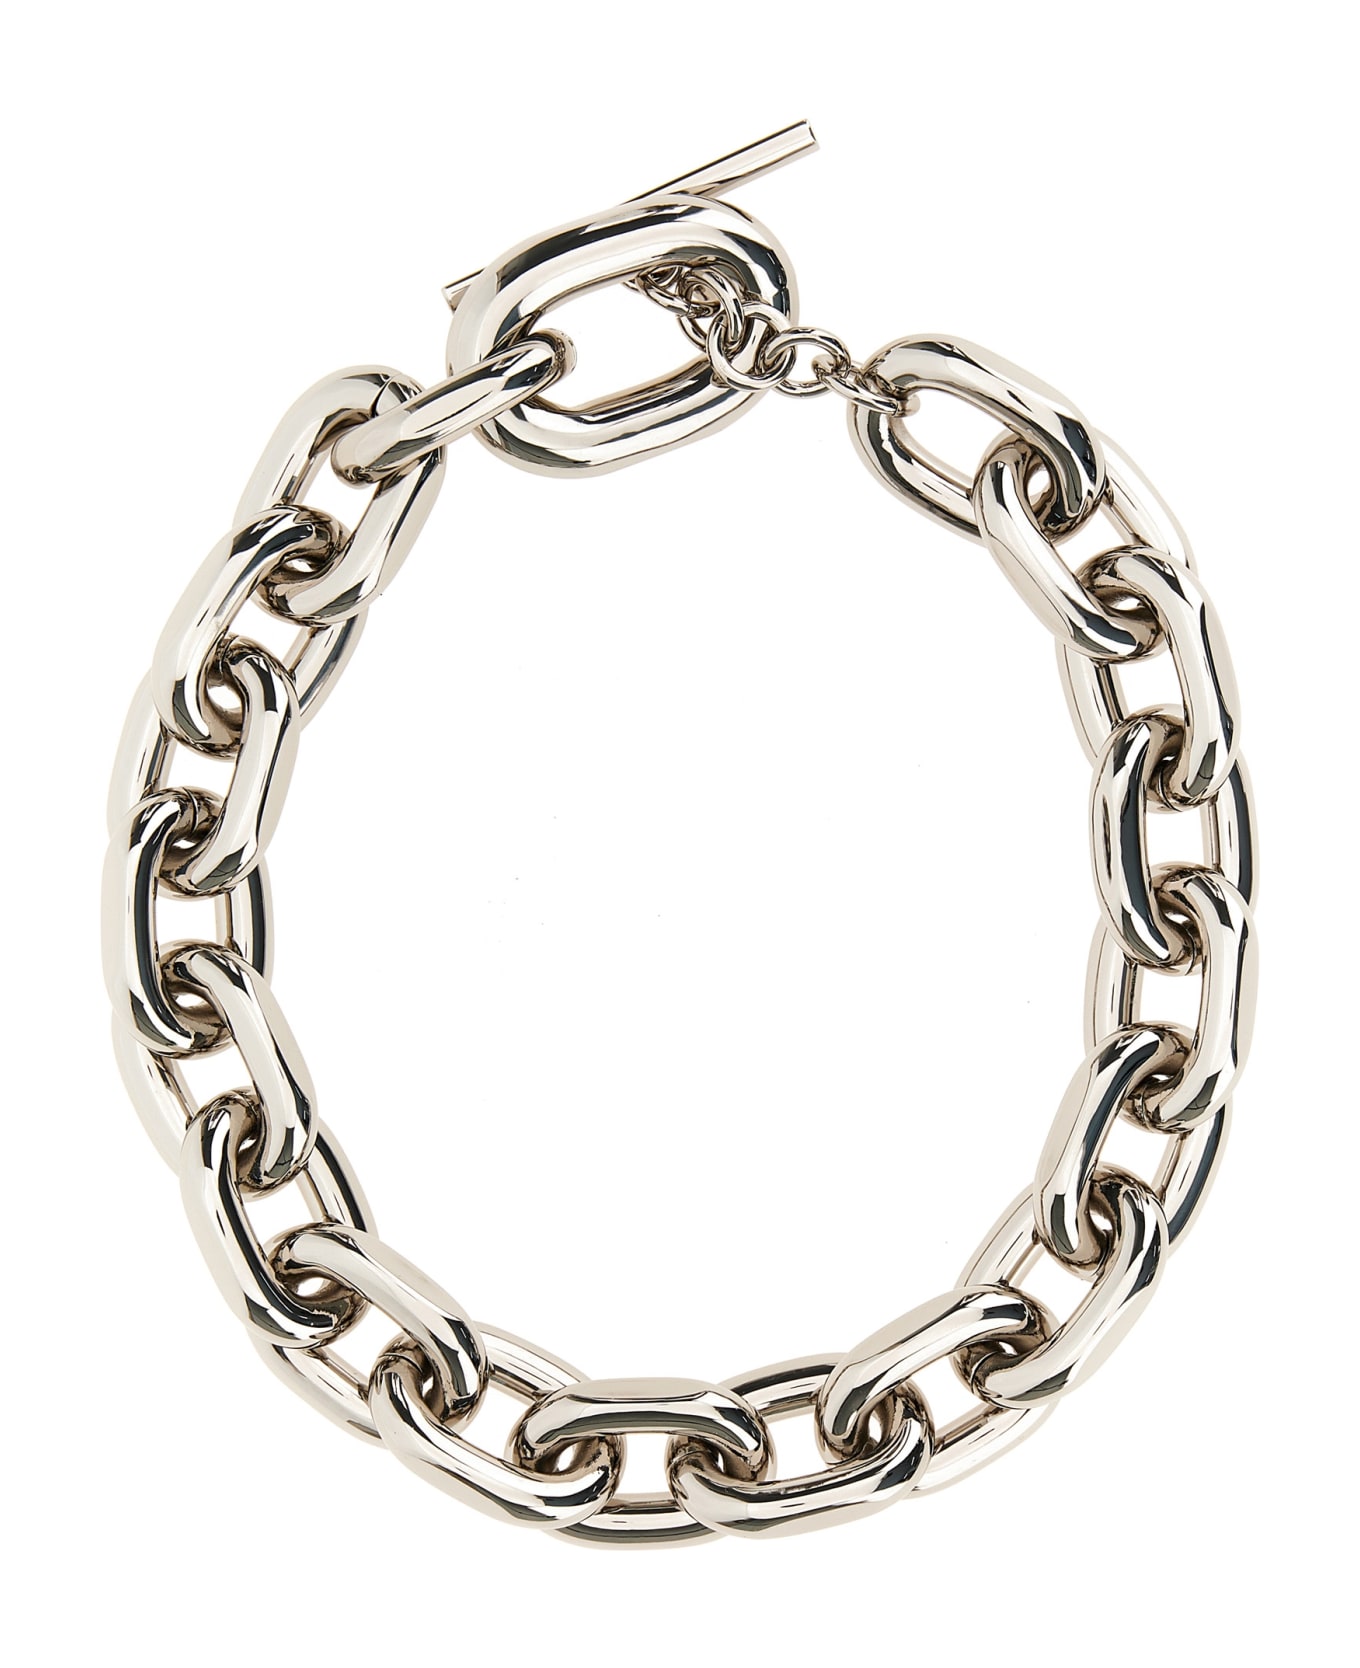 Paco Rabanne 'xl Lick' Necklace - Silver